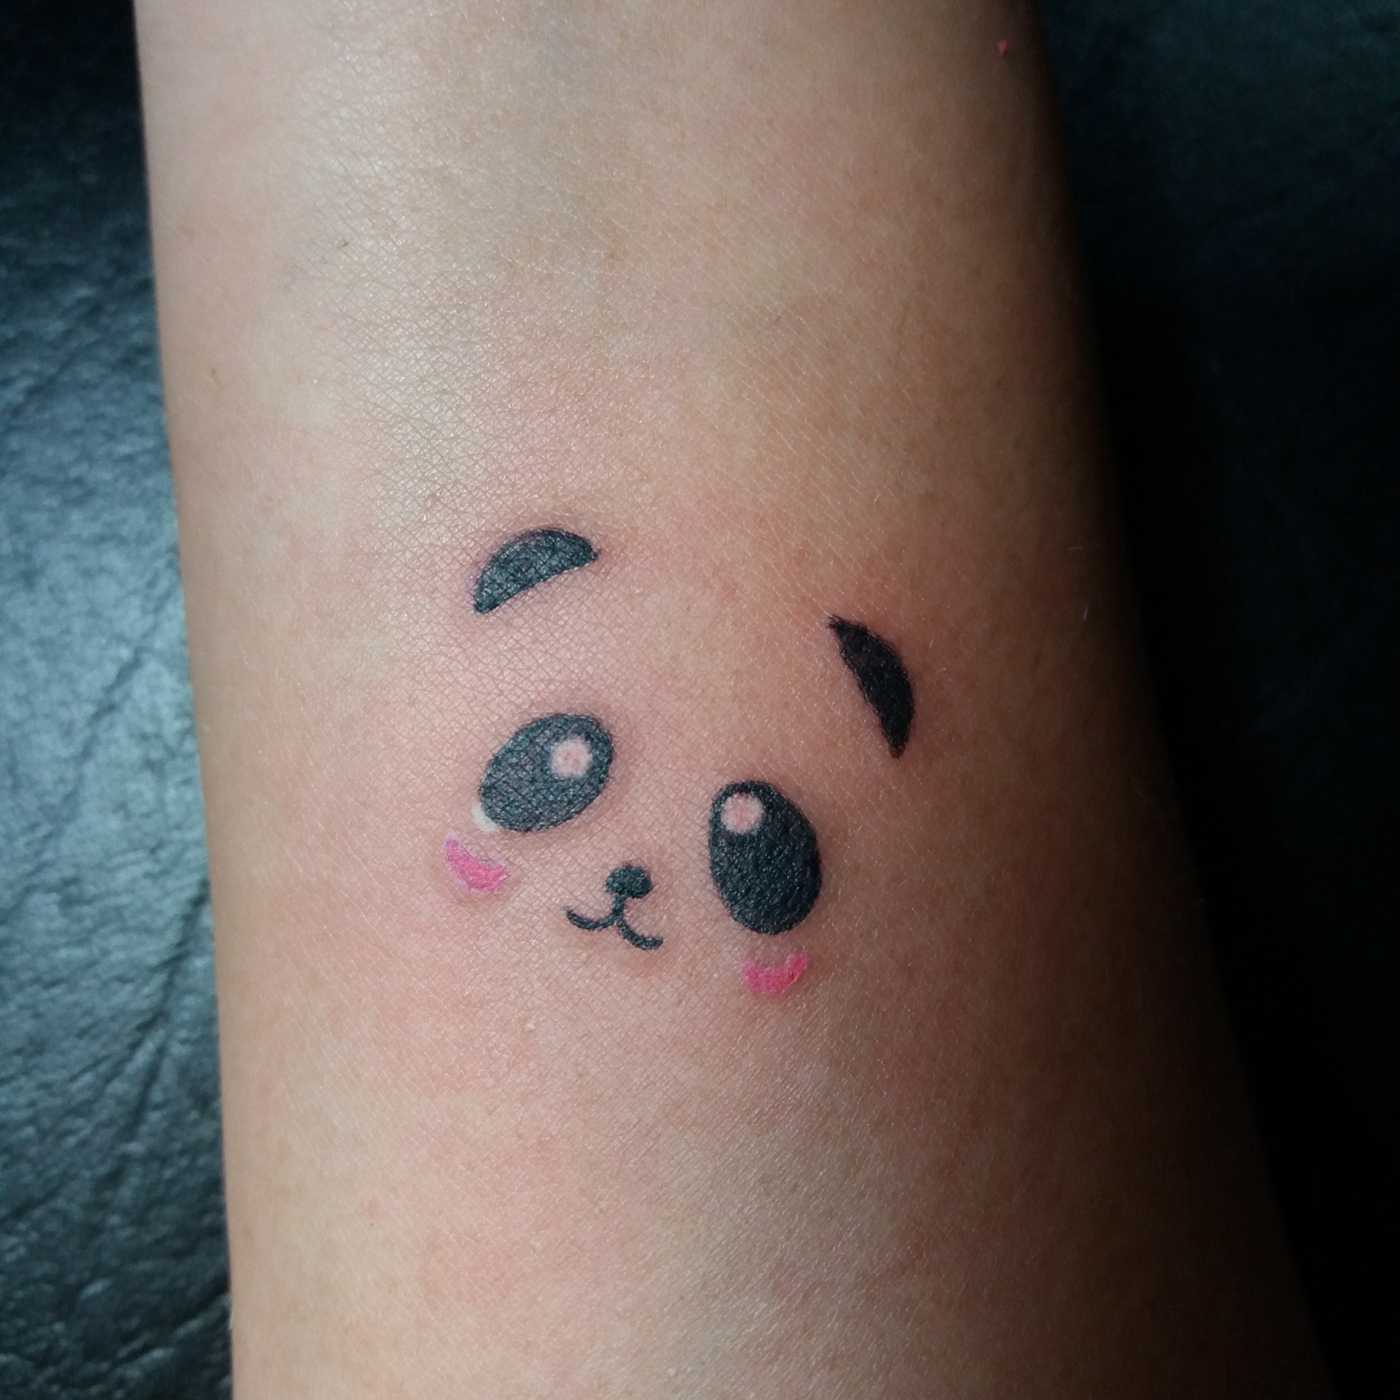 Small Panda Tattoo with minimalist design - Black and pink for one of these designs